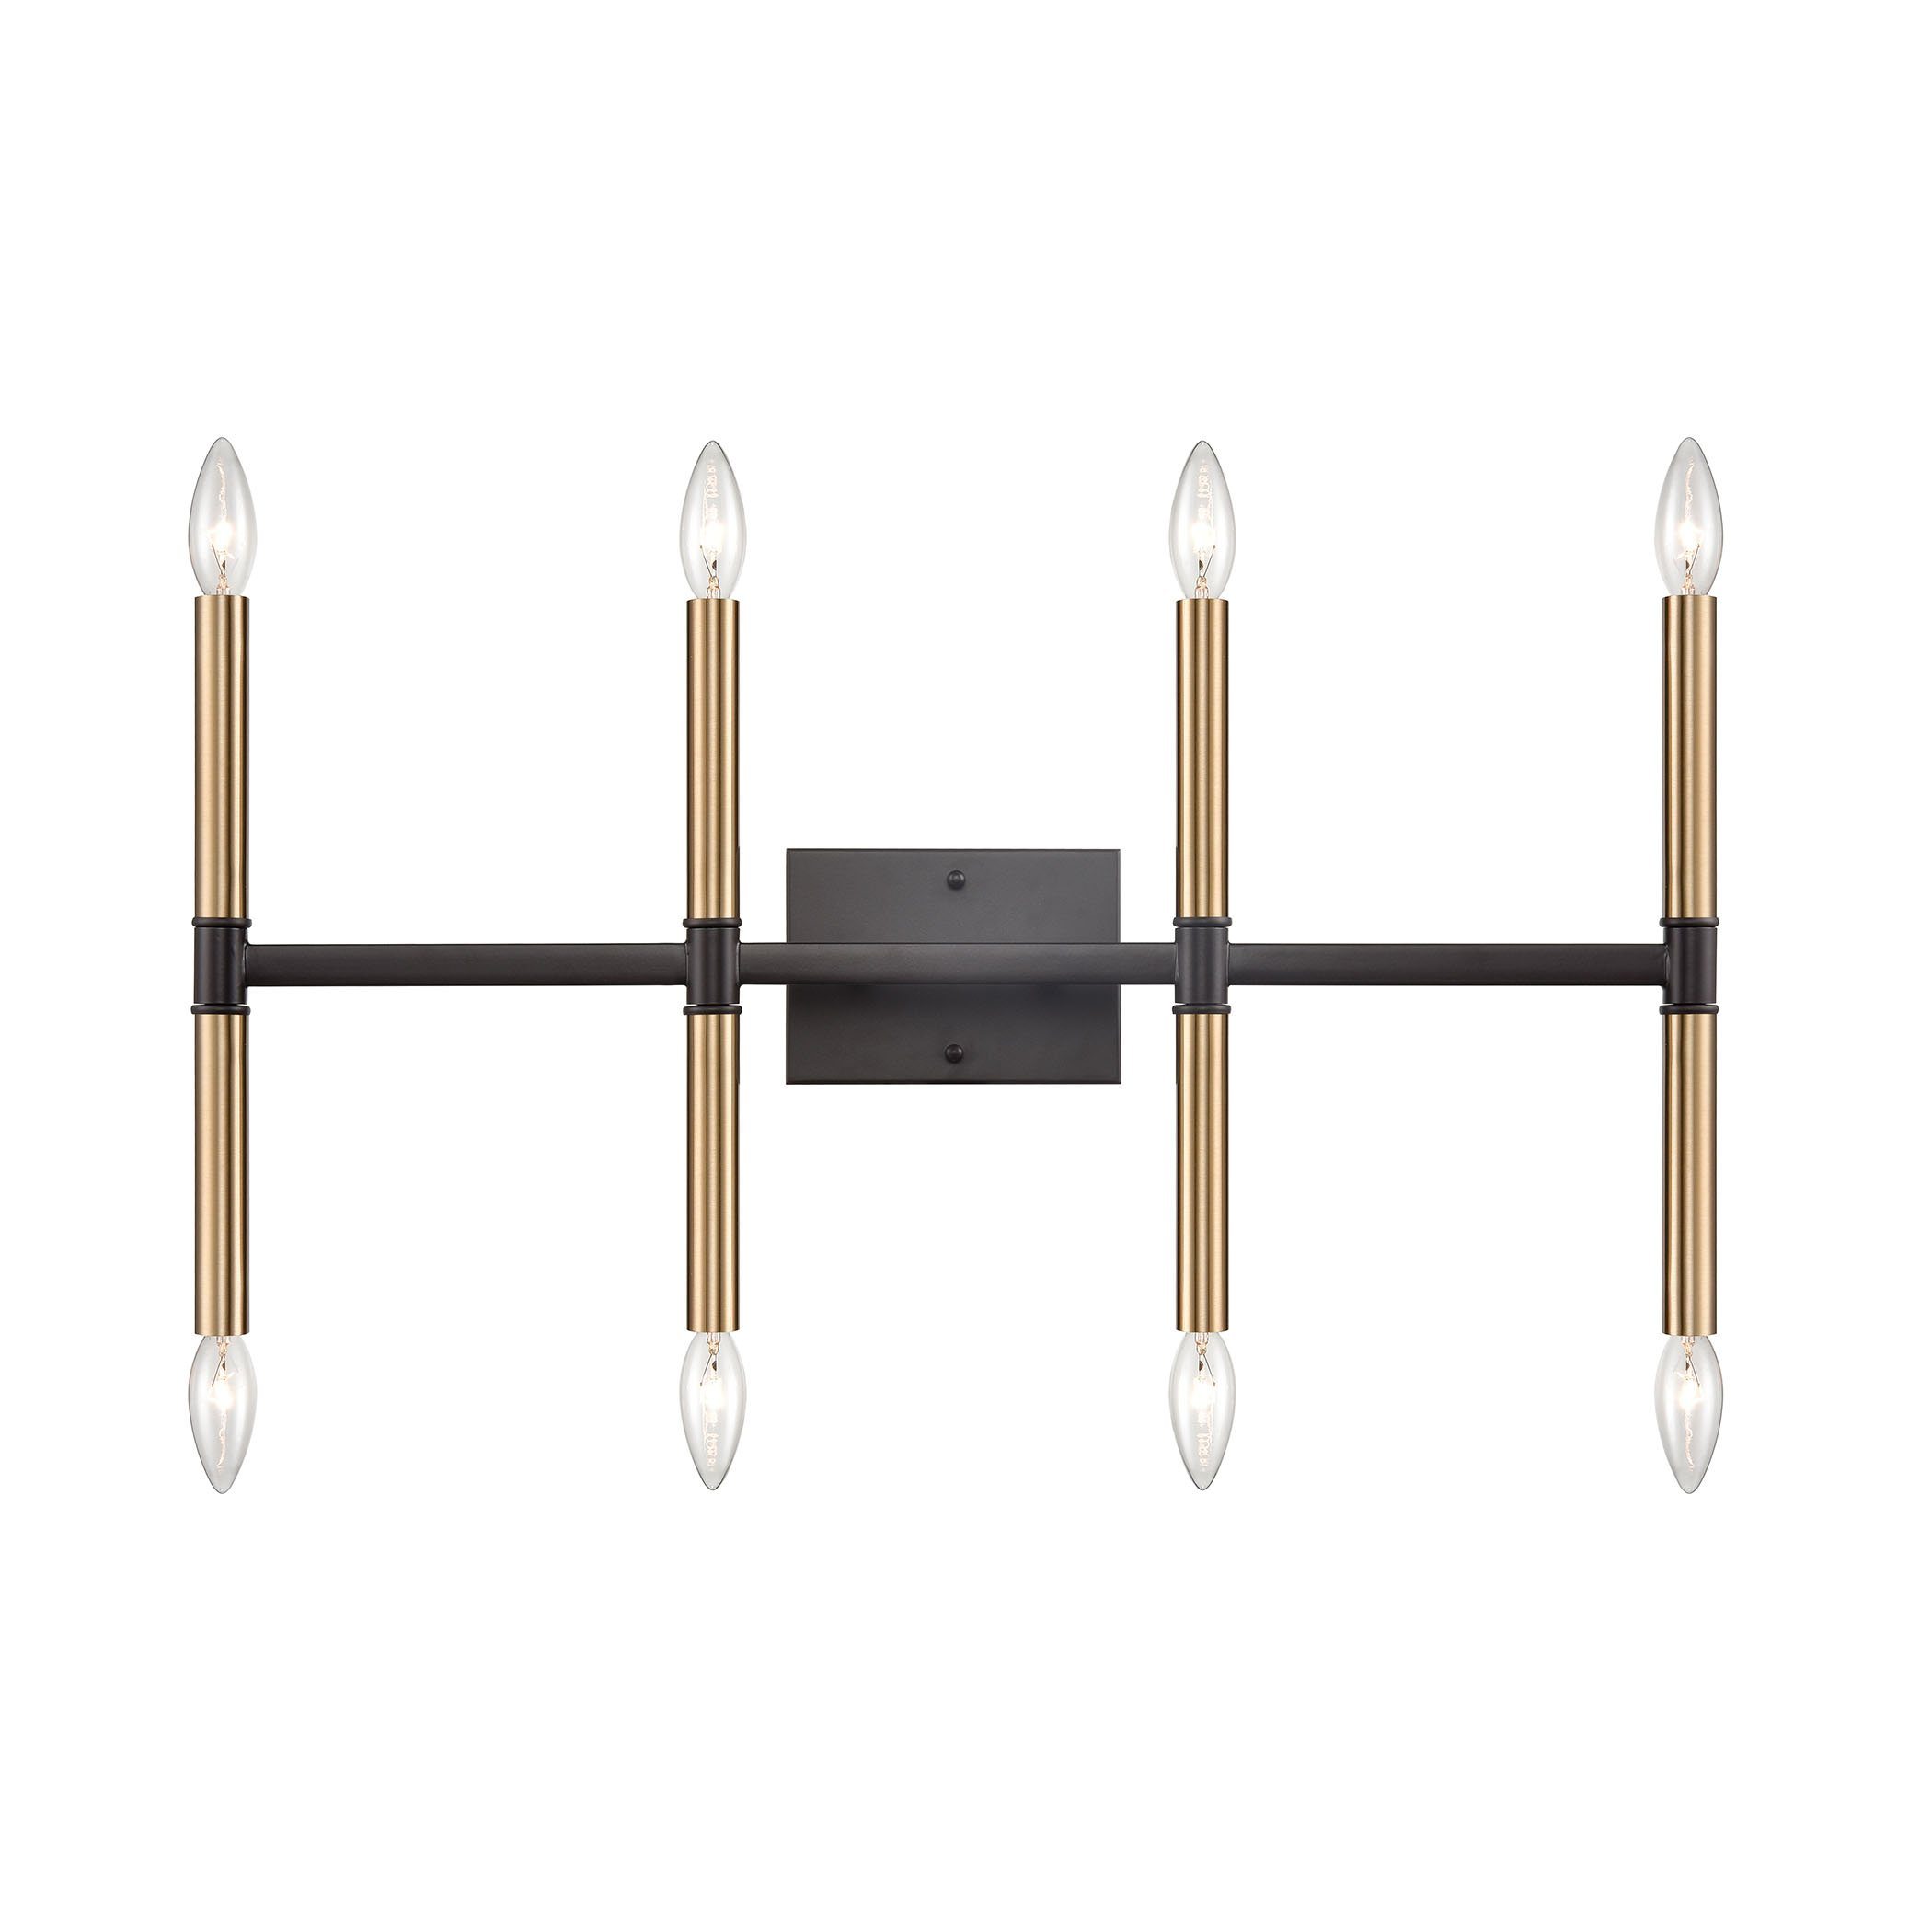 Notre Dame 8-Light Bath Bar in Oil Rubbed Bronze, Gold Wall Thomas Lighting 